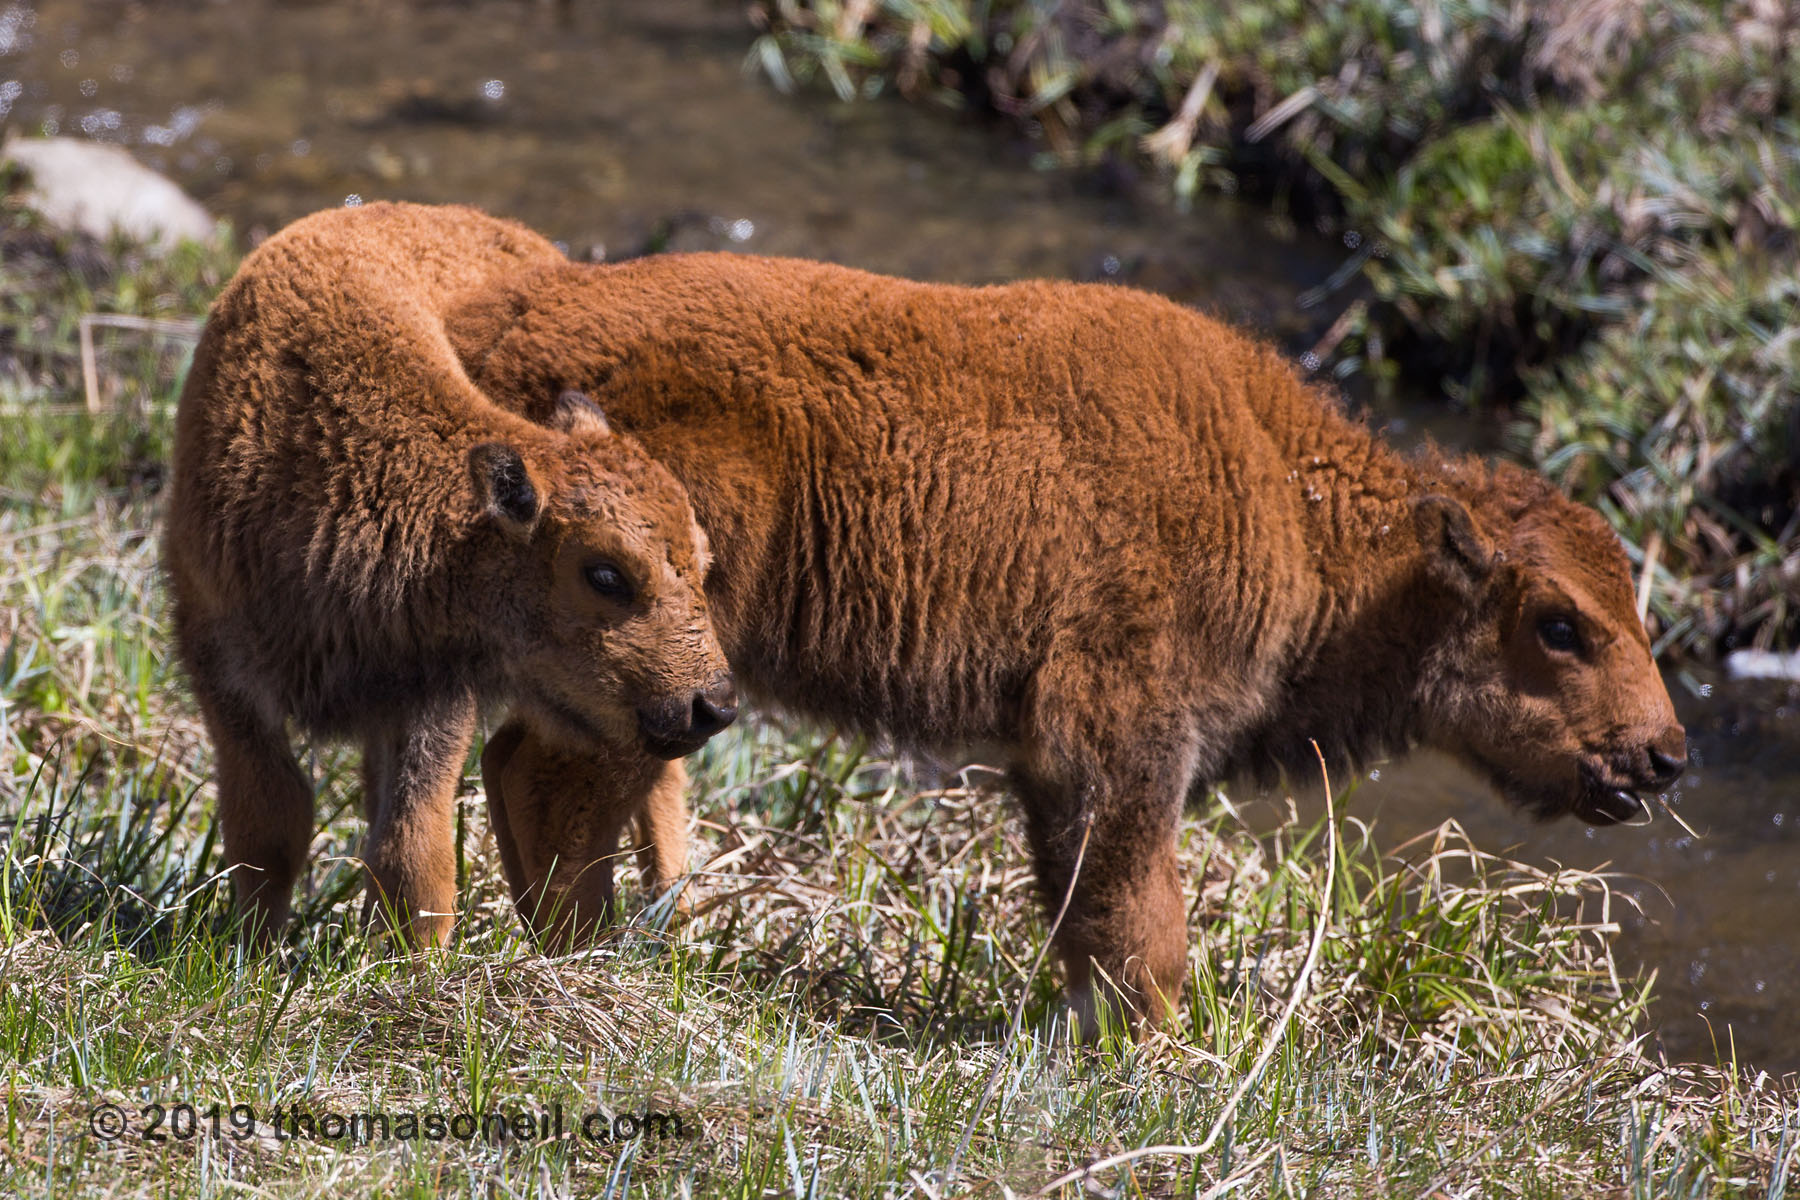 Baby bison, Custer State Park.  Click for next photo.